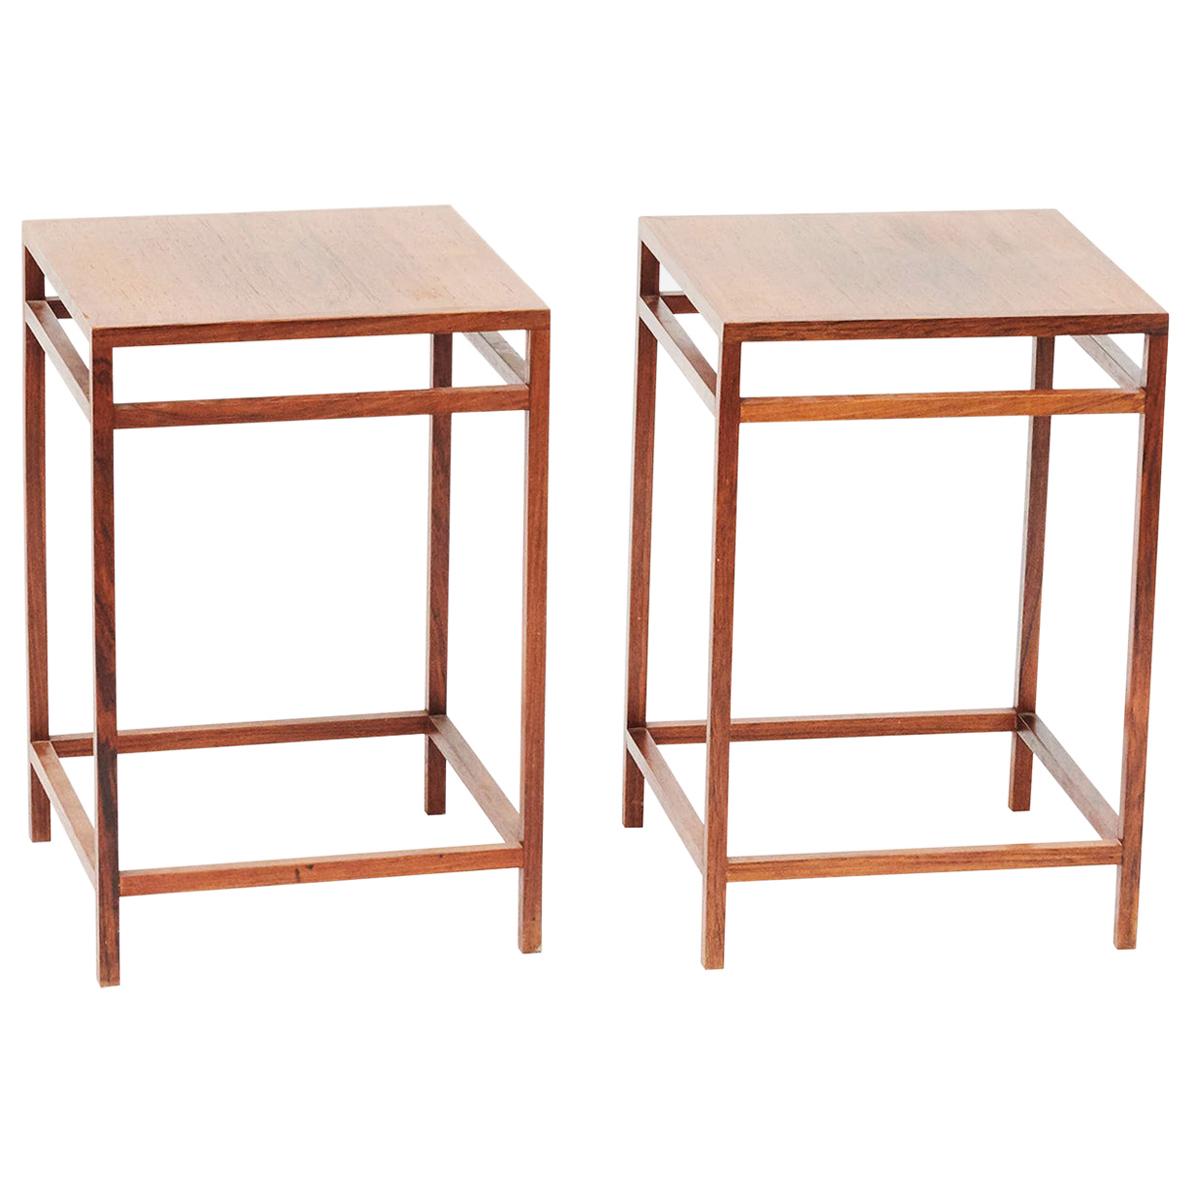 Pair of Rosewood Side Tables by Willy Beck, Denmark, 1950s